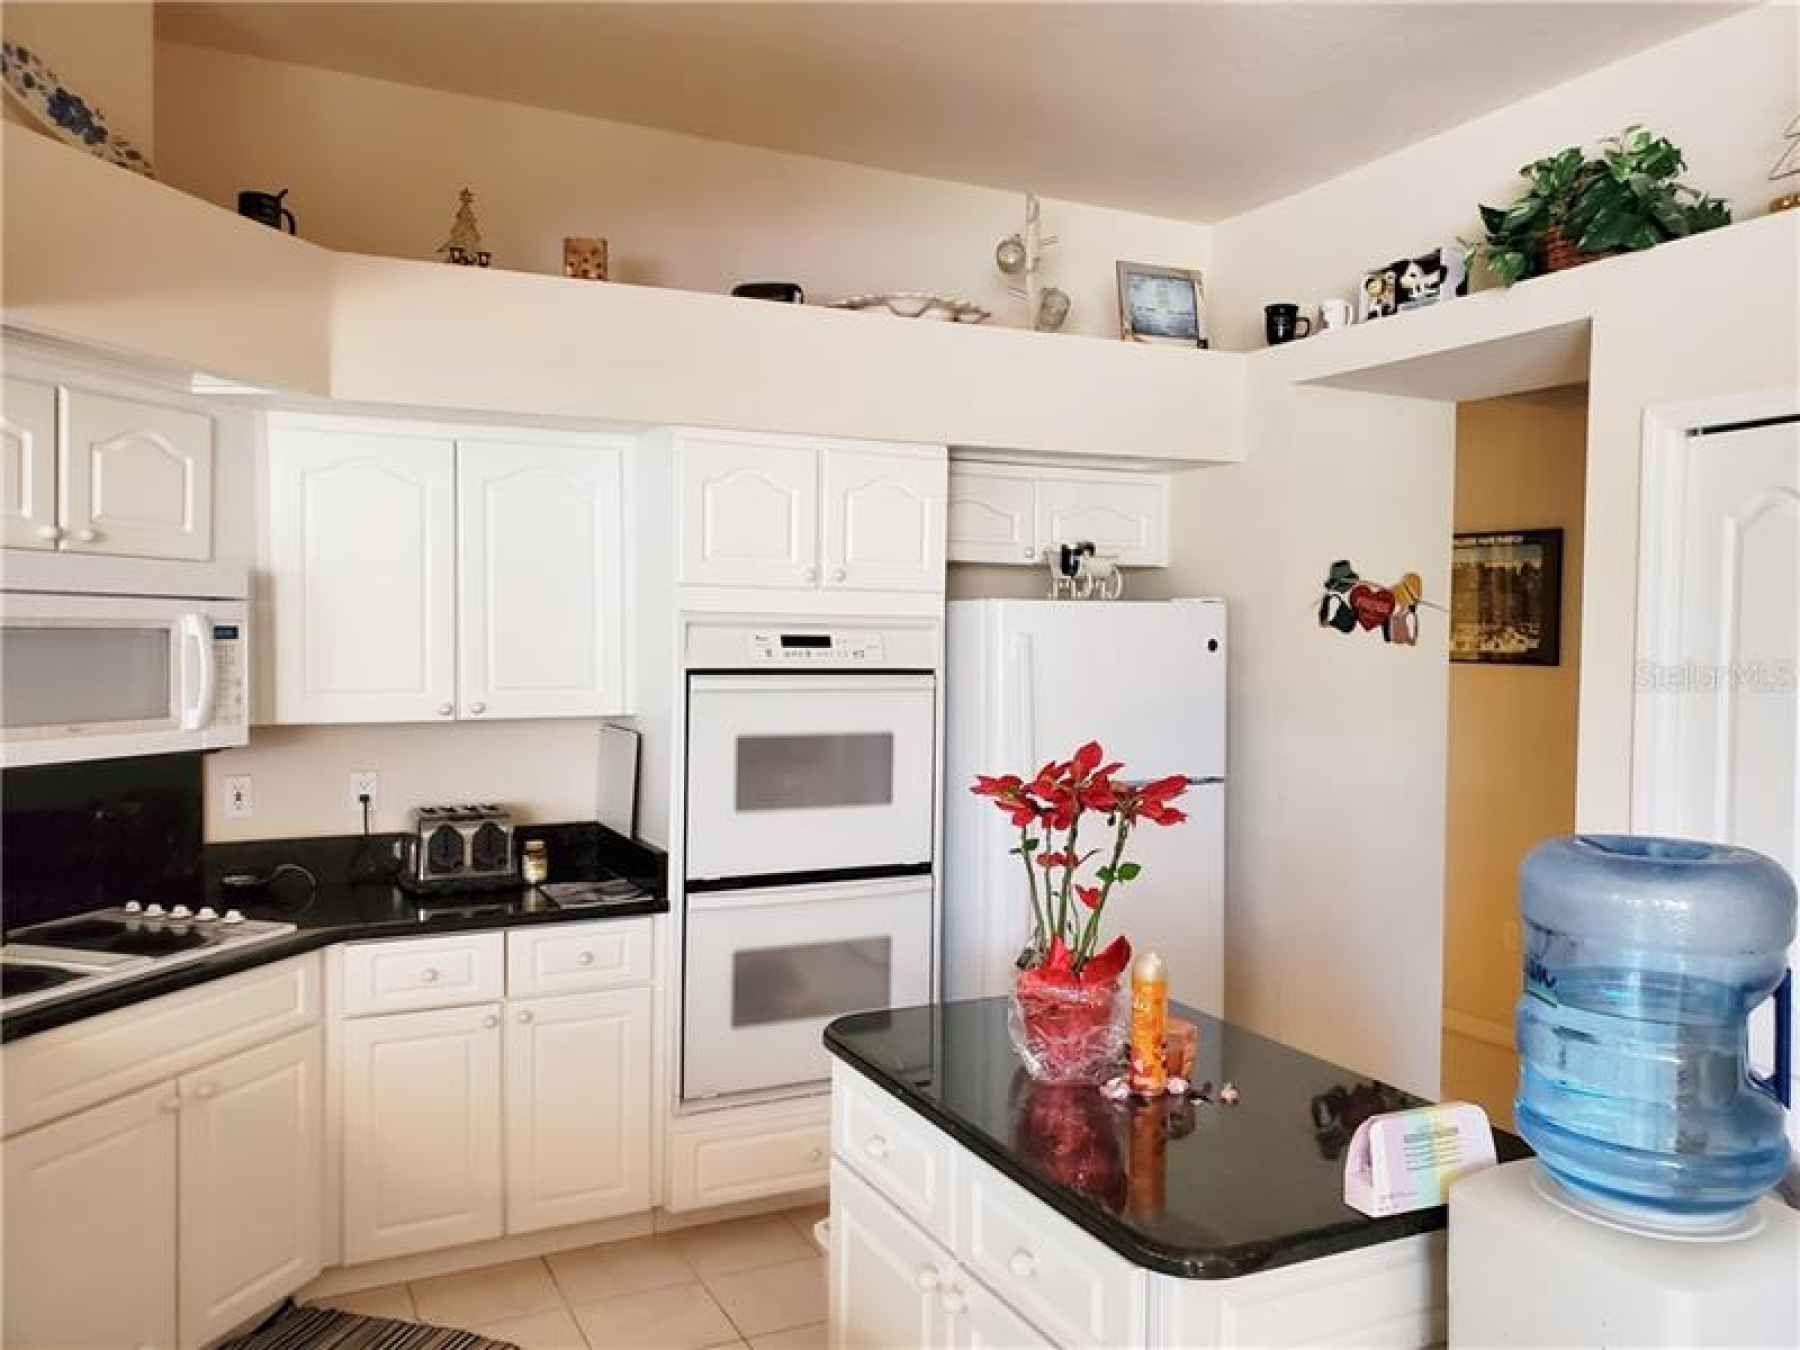 Kitchen with double oven and island.  Kitchen also has desk area and plenty of cabinet space